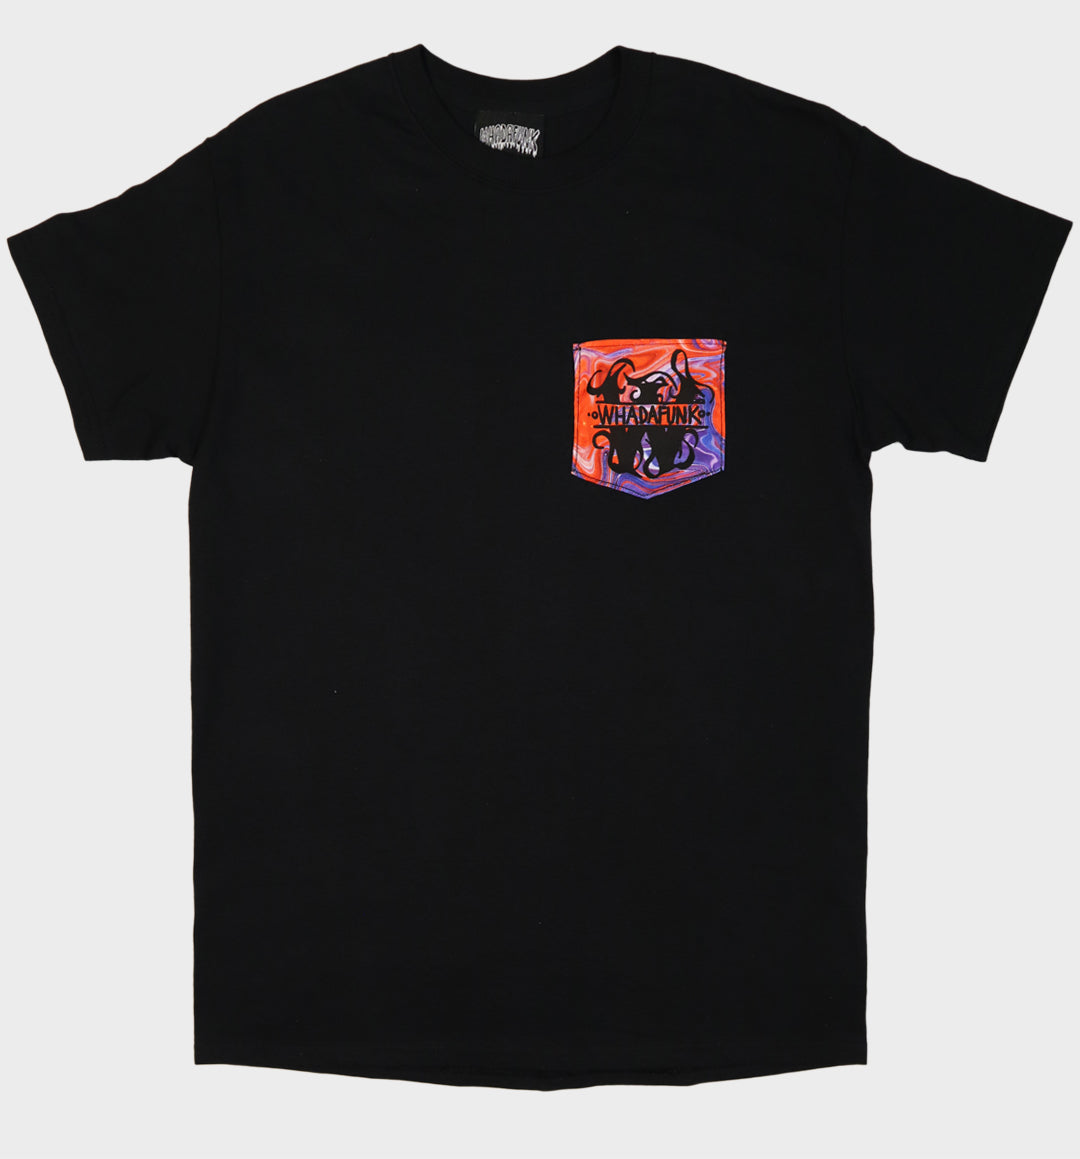 TRIPPIN OUT POCKET T-SHIRT